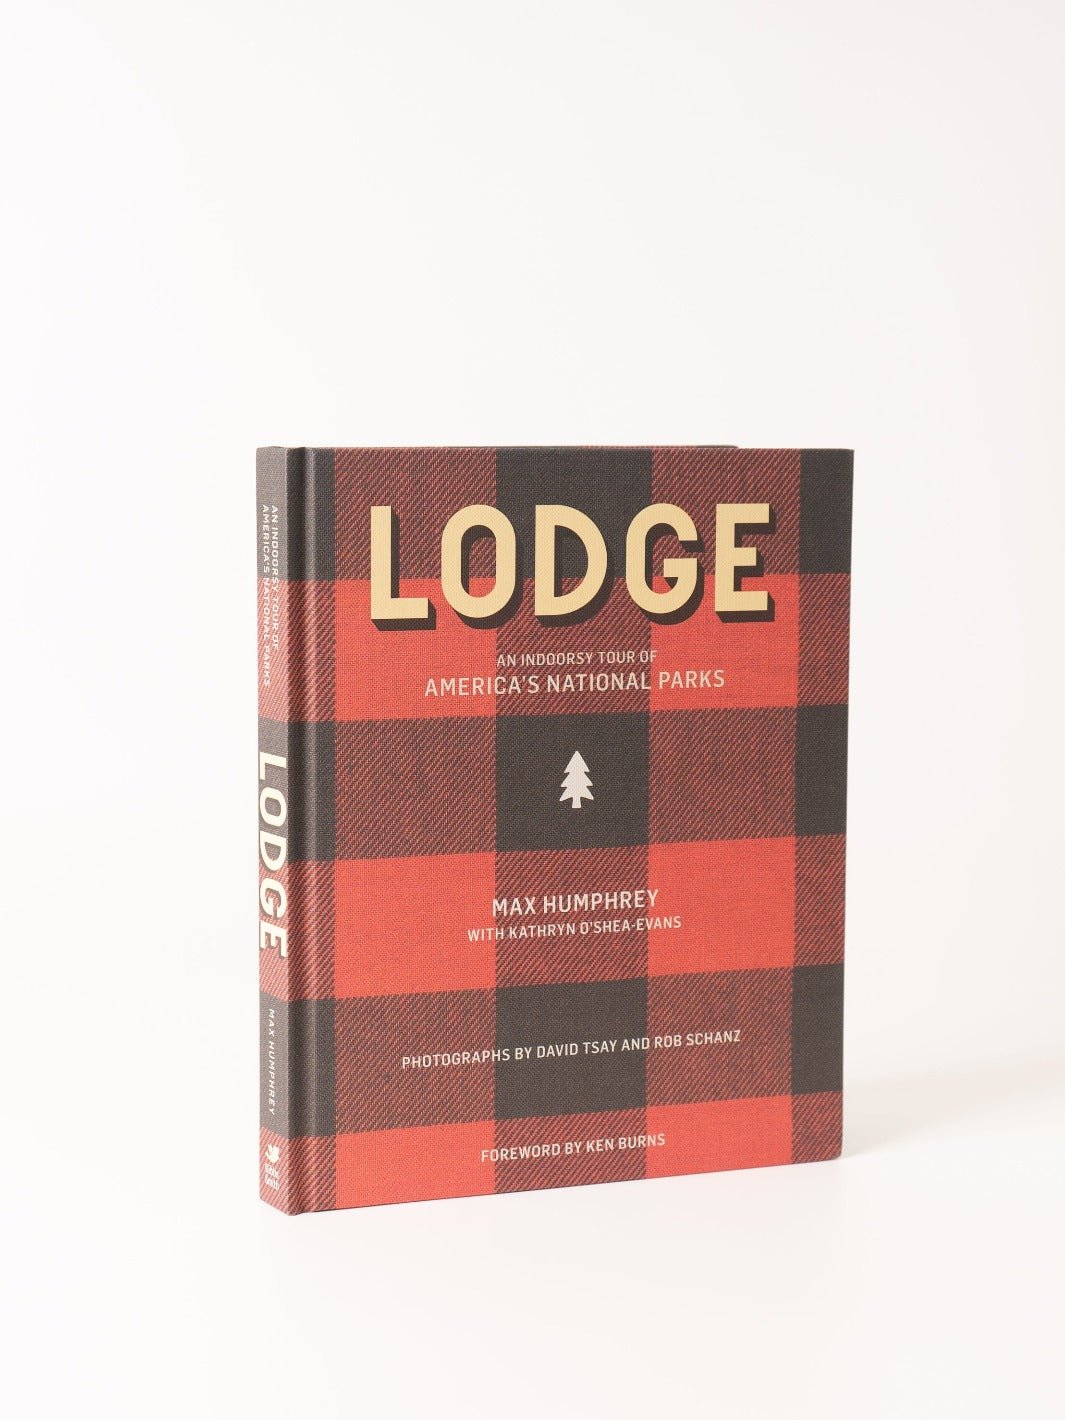 Lodge: An Indoorsy Tour of America's National Parks - Heyday